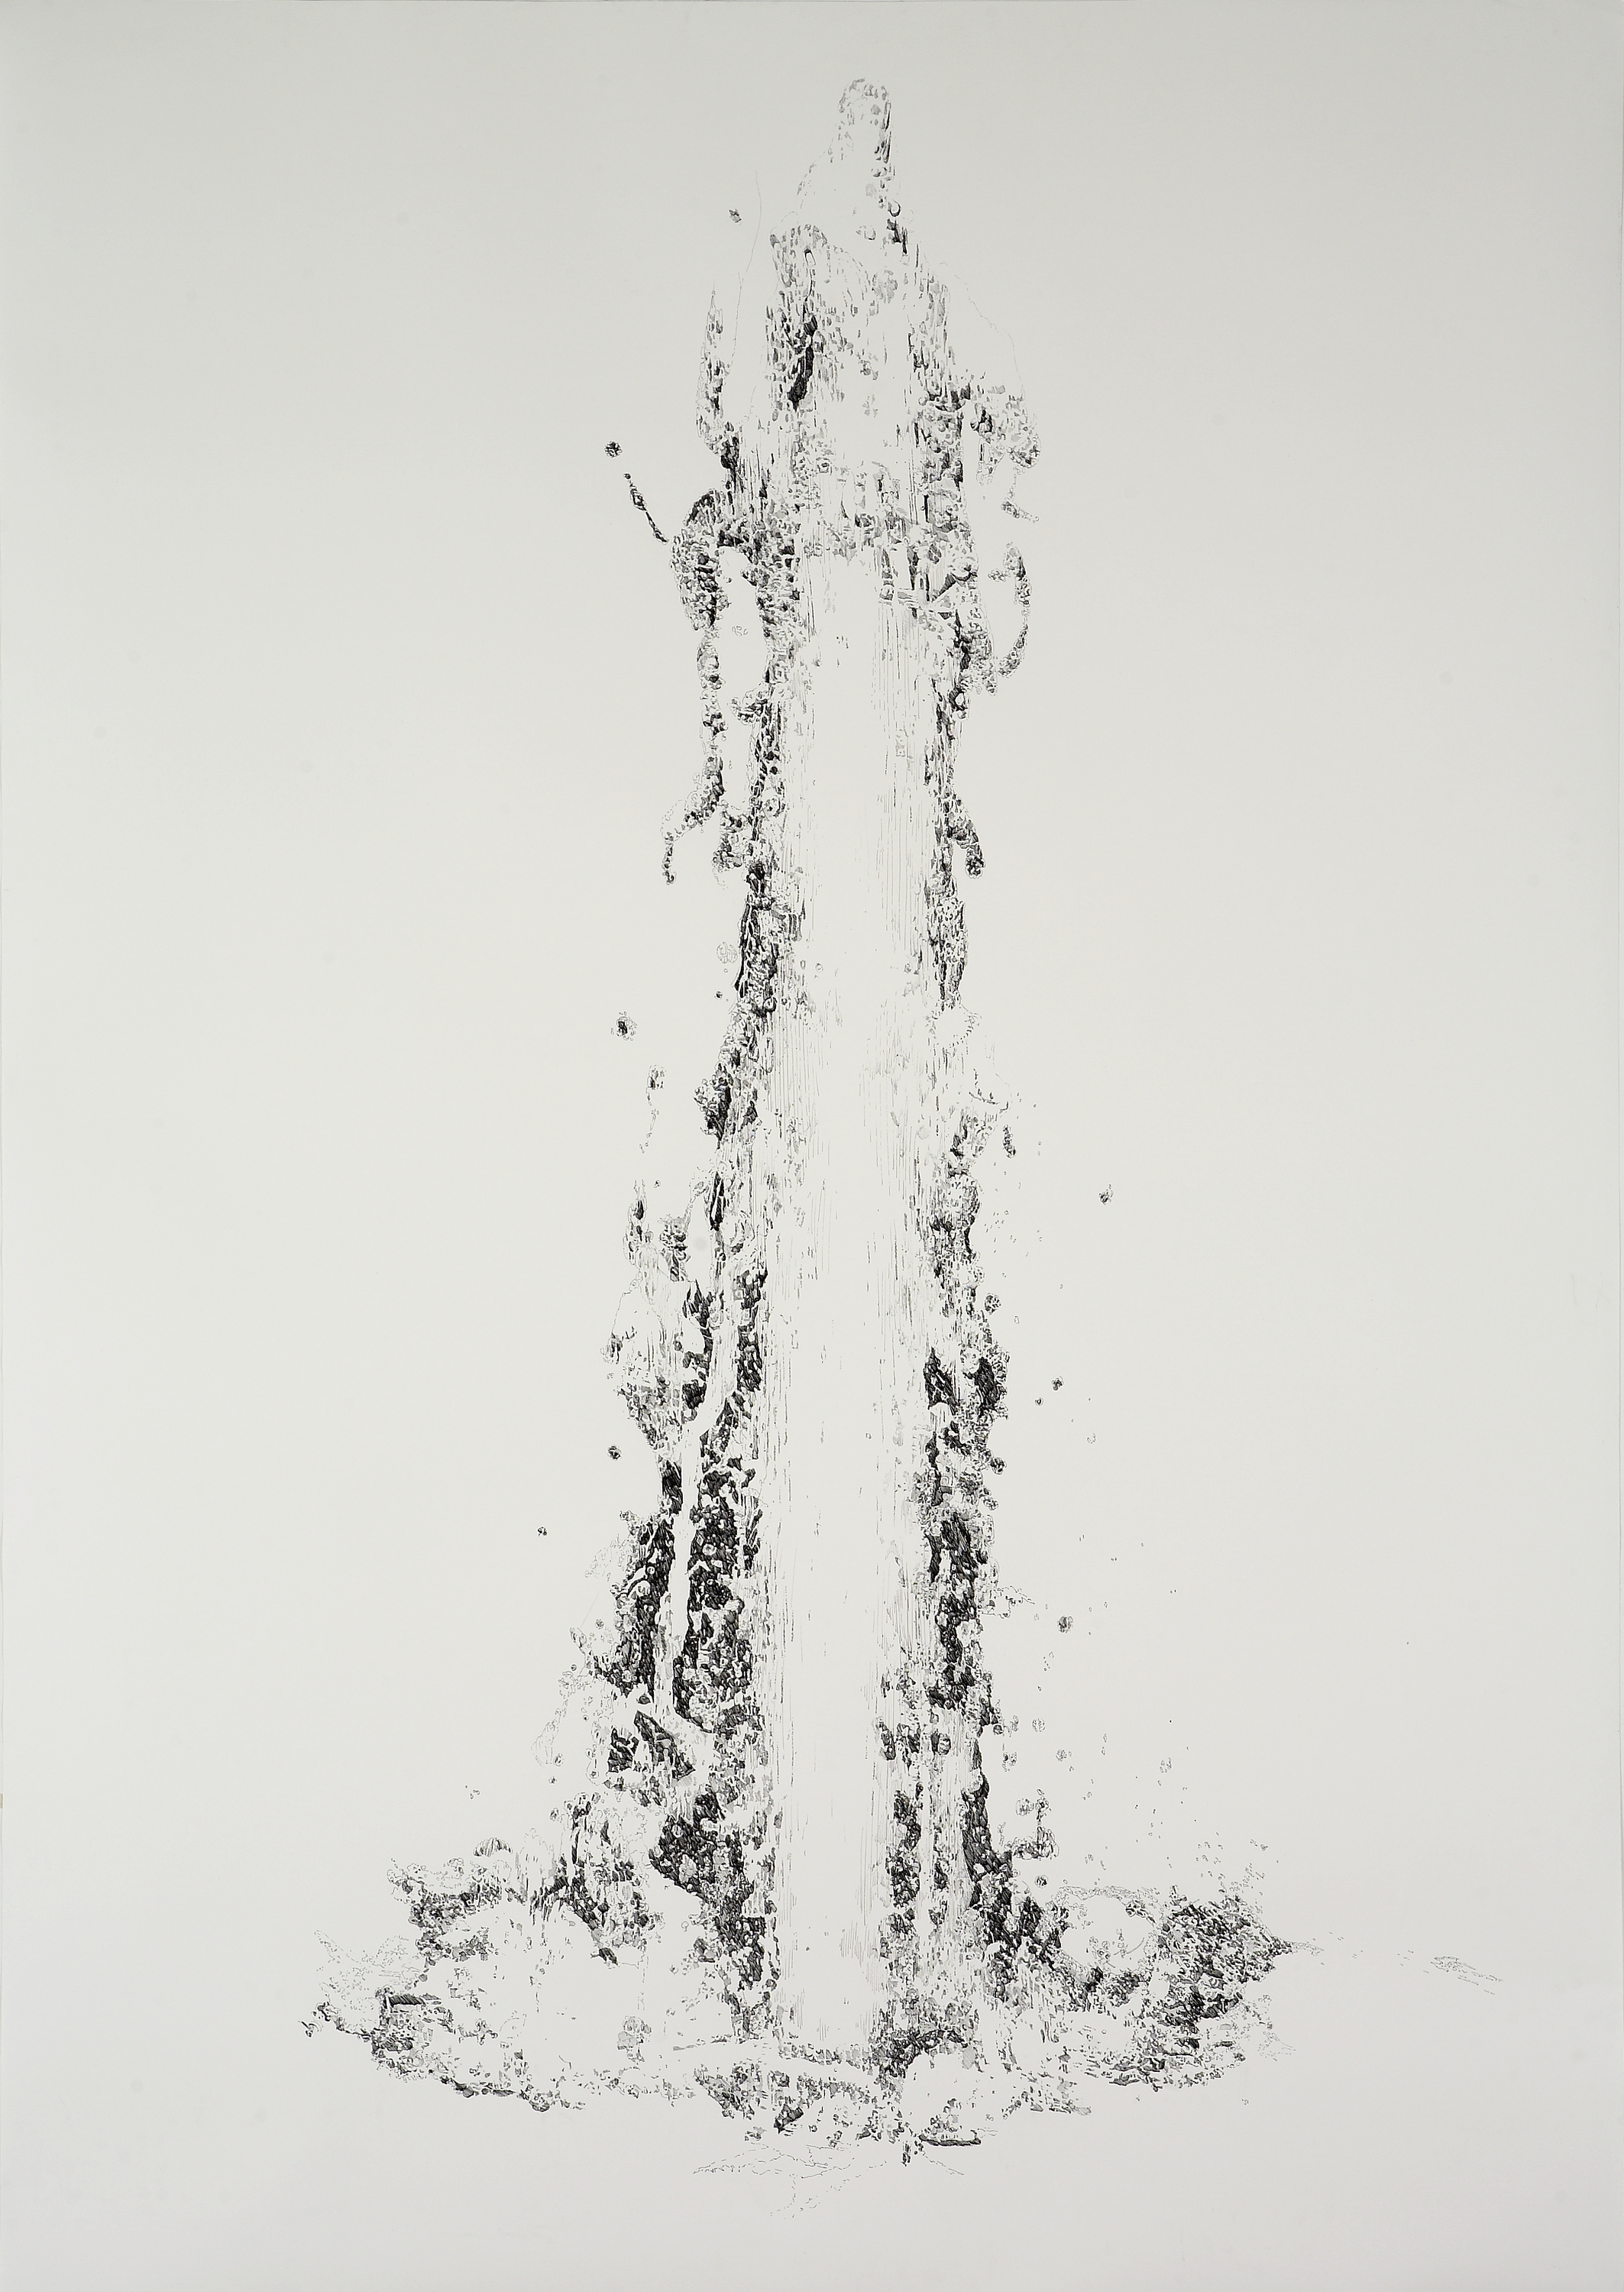 BK P5.002 | untitled | ink on paper | 200x150cm | 2011 | privat collection berlin